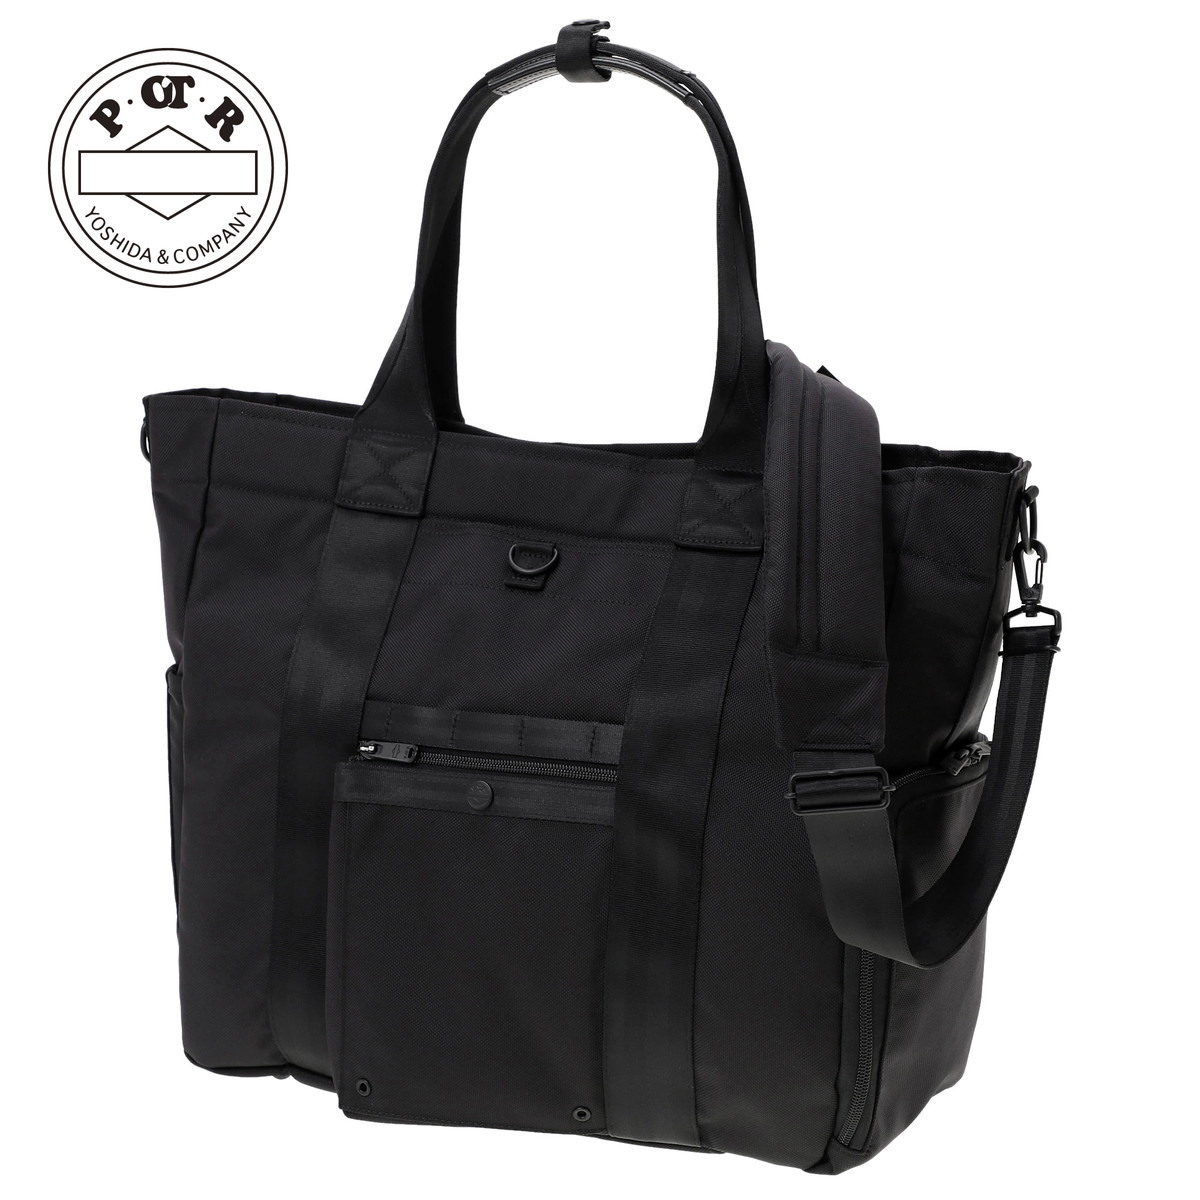 POTR / SCOPE URBAN TOTE ピー・オー・ティー・アール / スコープ アーバントート 995-19551｜galleria-onlineshop｜02